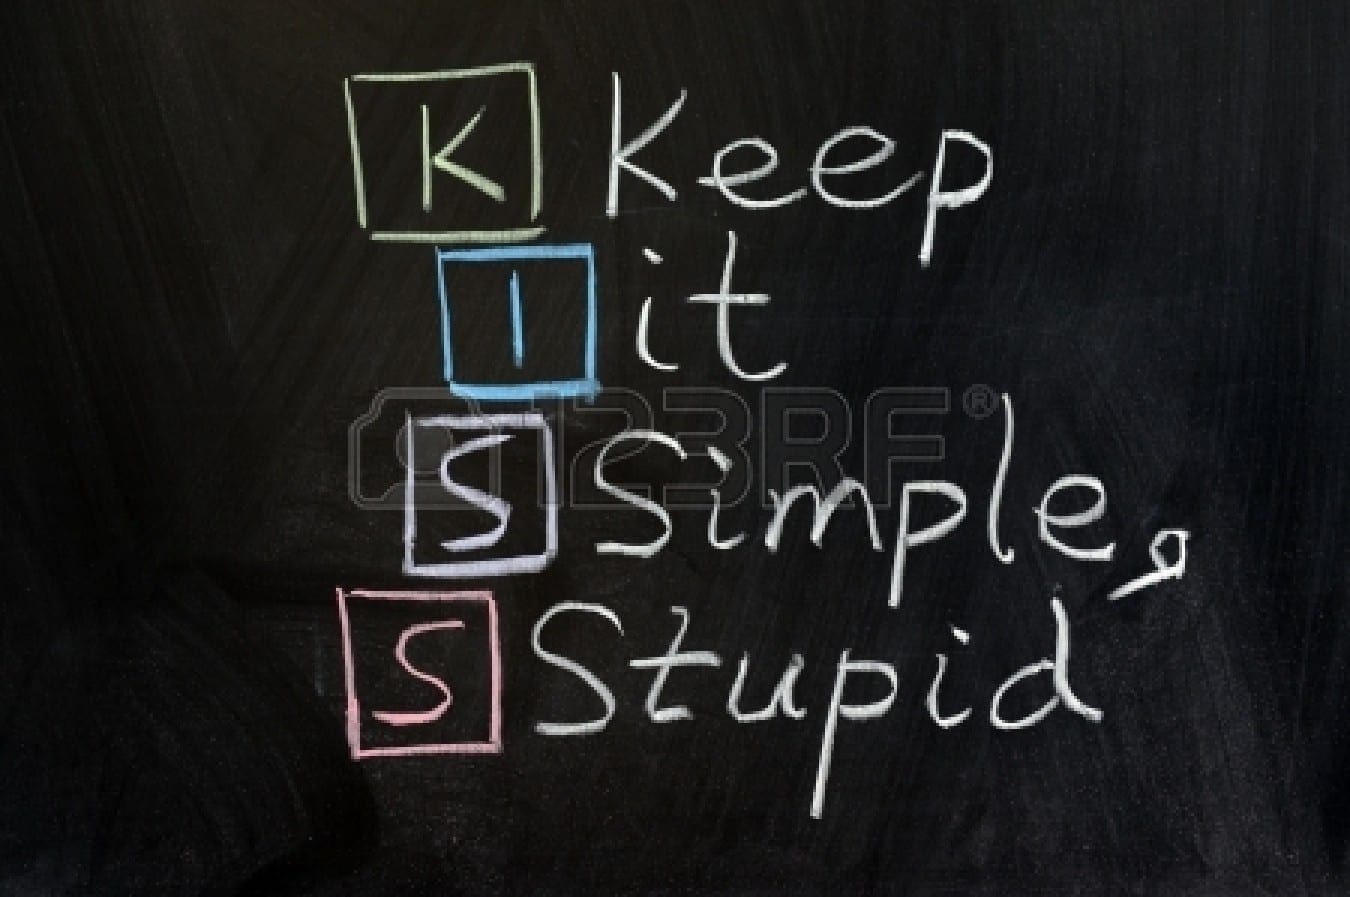 The KISS philosophy states that most systems work best if they are kept simple rather than made complex, therefore simplicity should be a key goal in design and unnecessary complexity should be avoided.